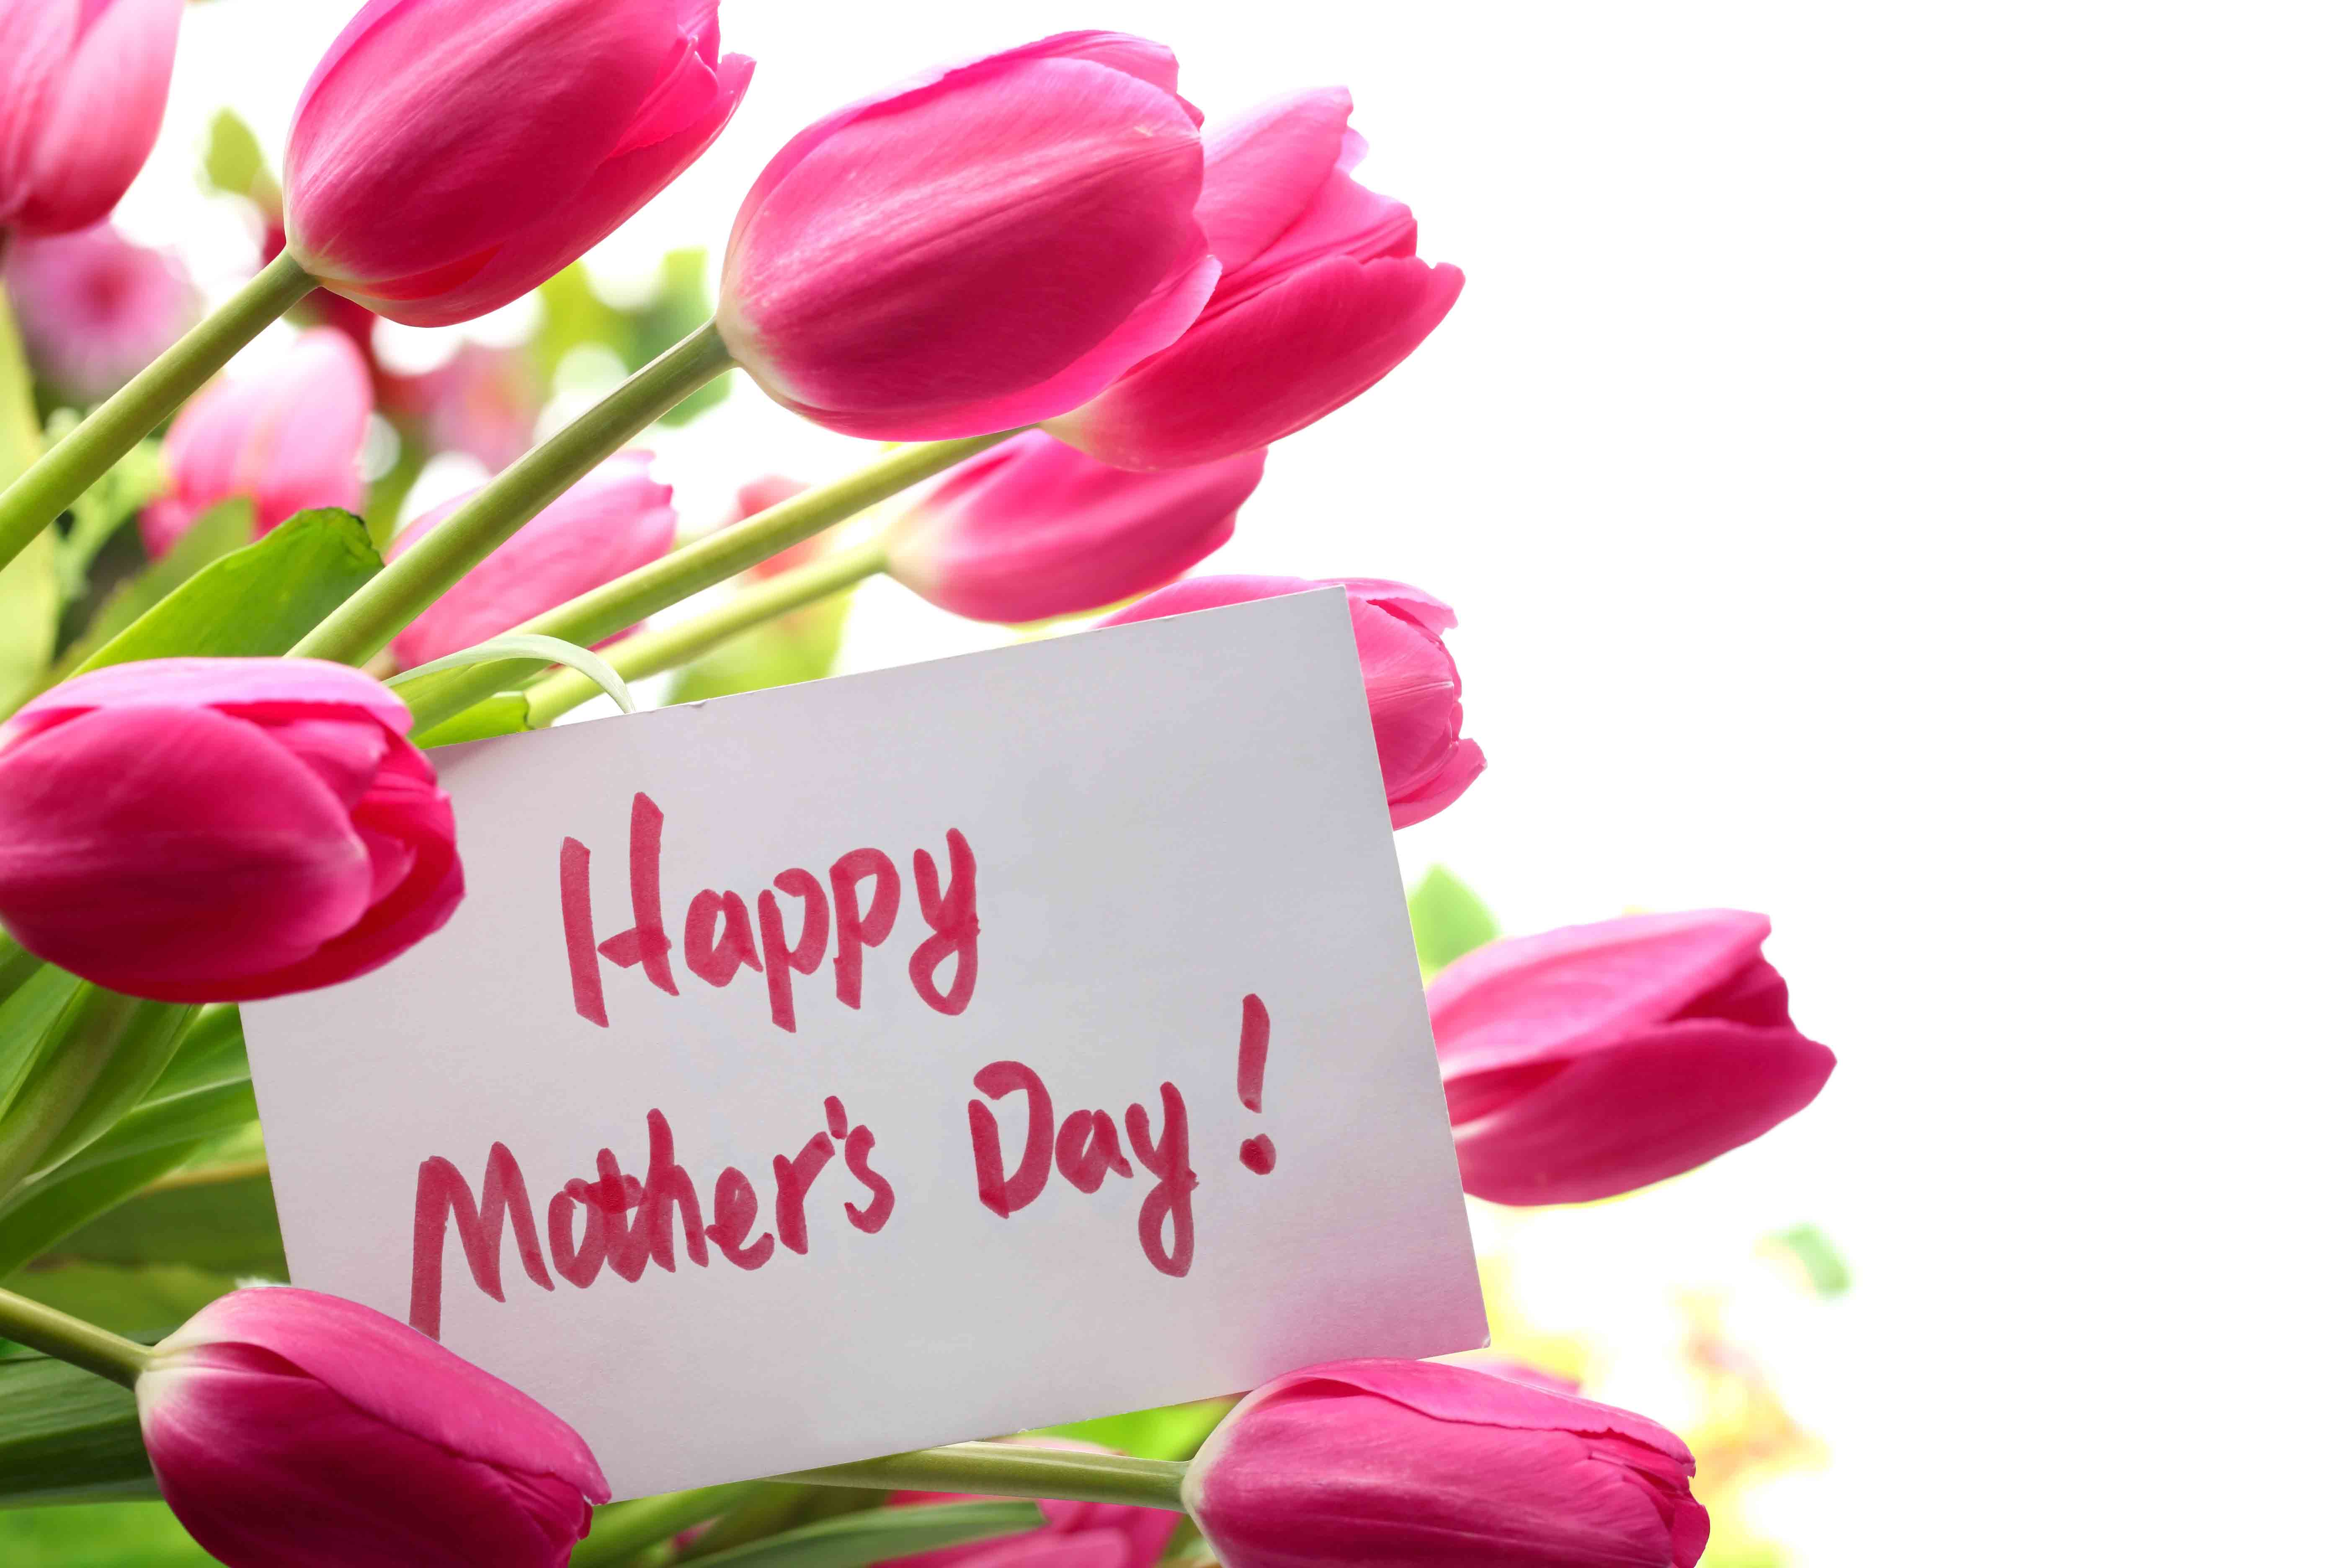 Happy Mother’s Day Card With Pink Tulip Flowers